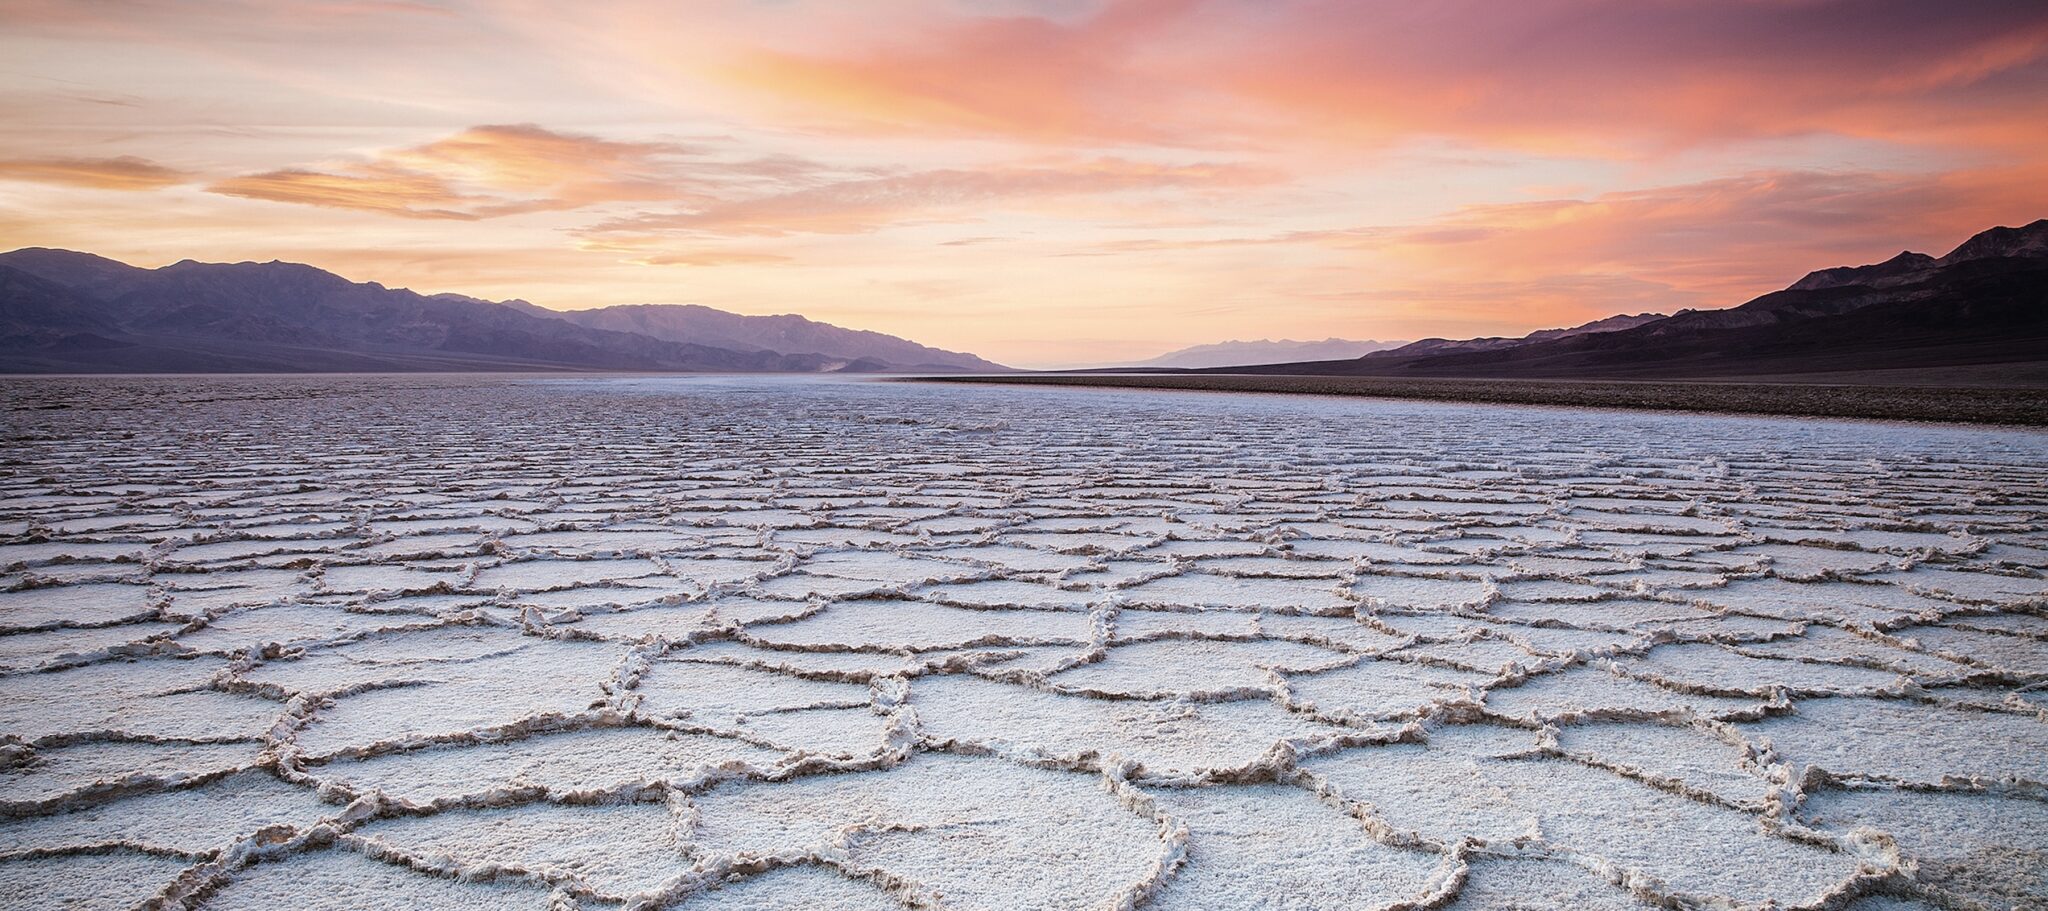 Sunset in Badwater, Death Valley National Park